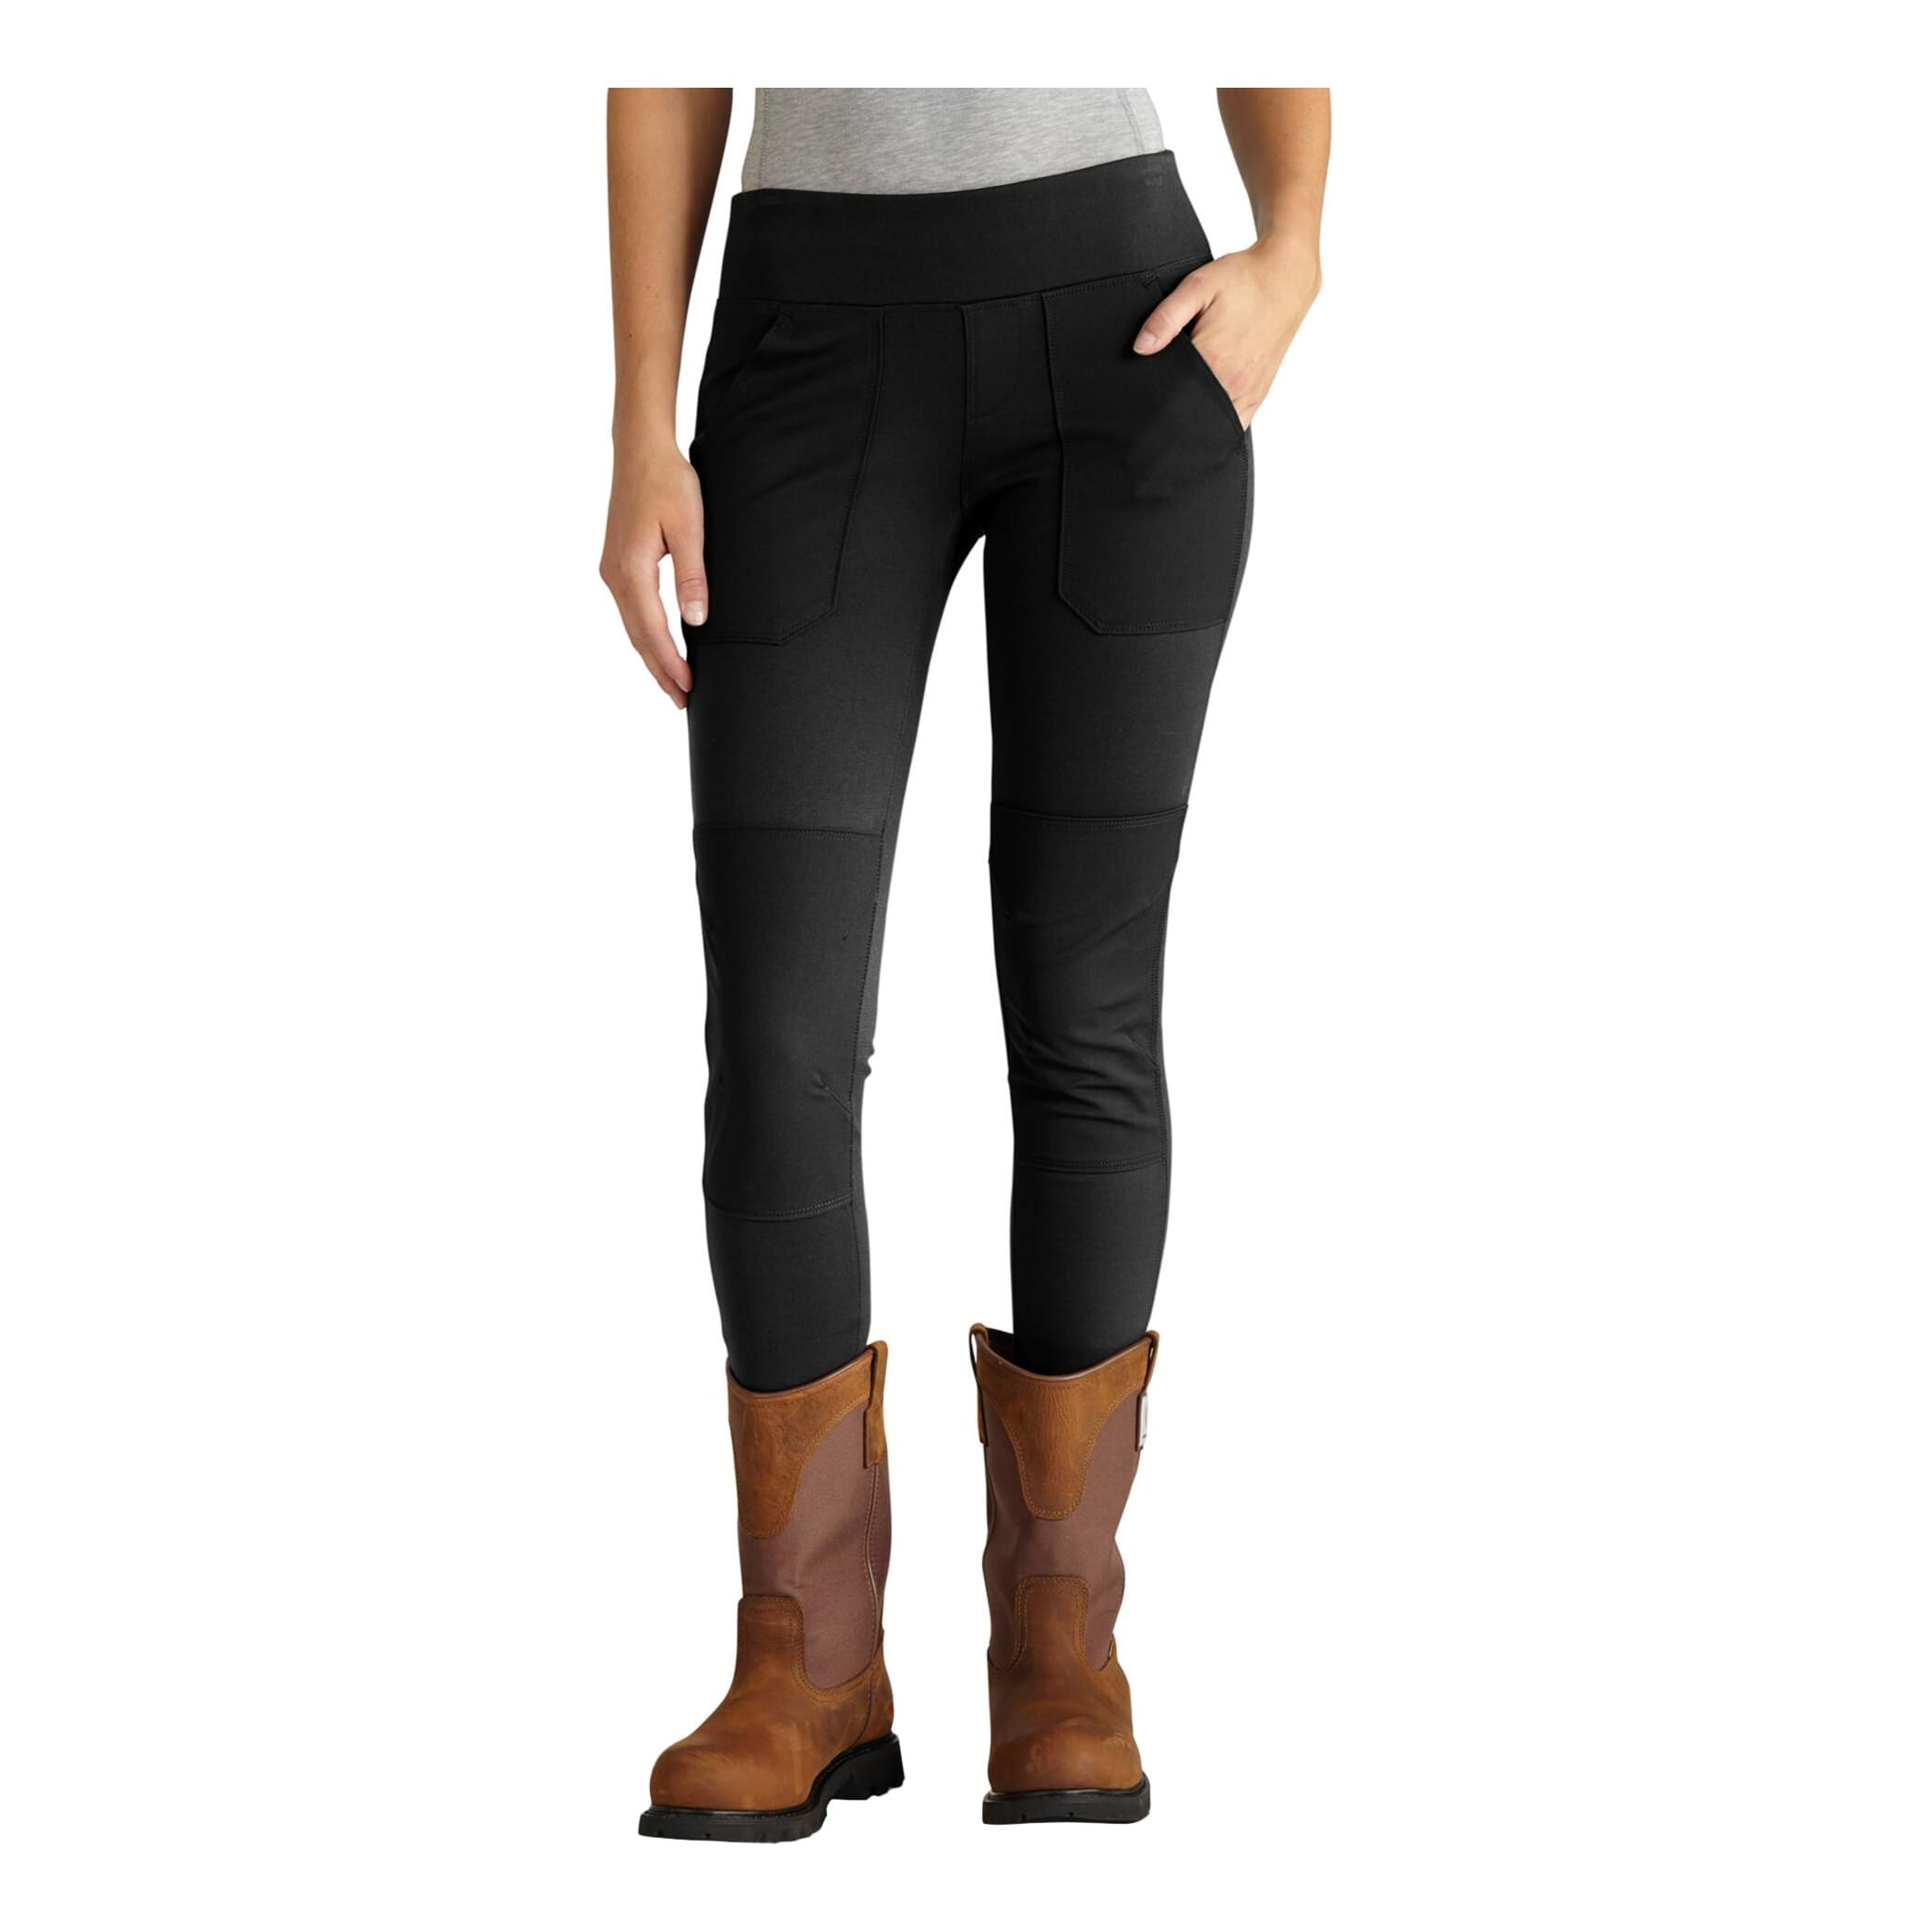 Carhartt® Women’s Force Fitted Midweight Utility Legging